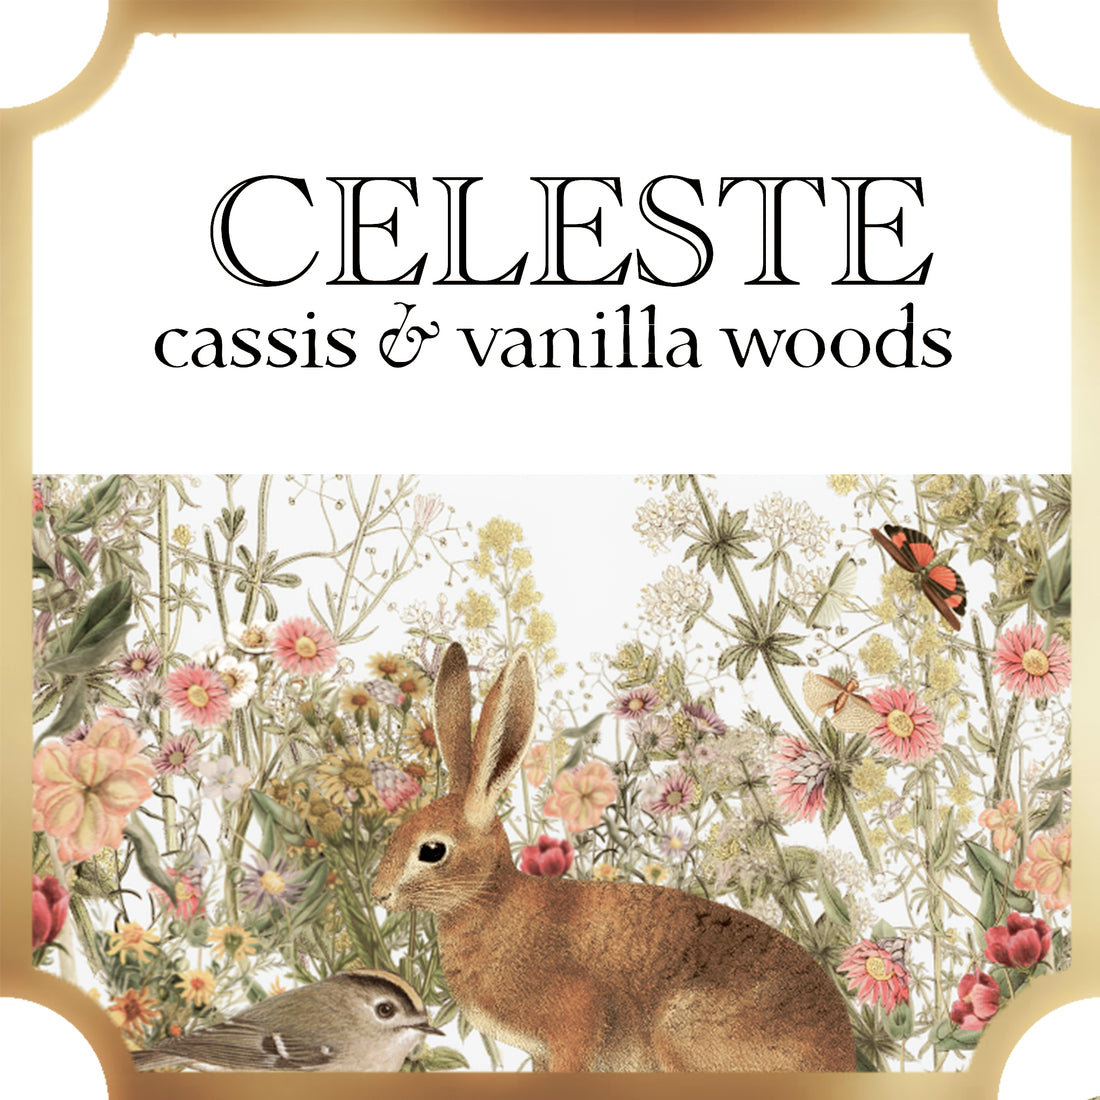  celeste collection a pleasant thought